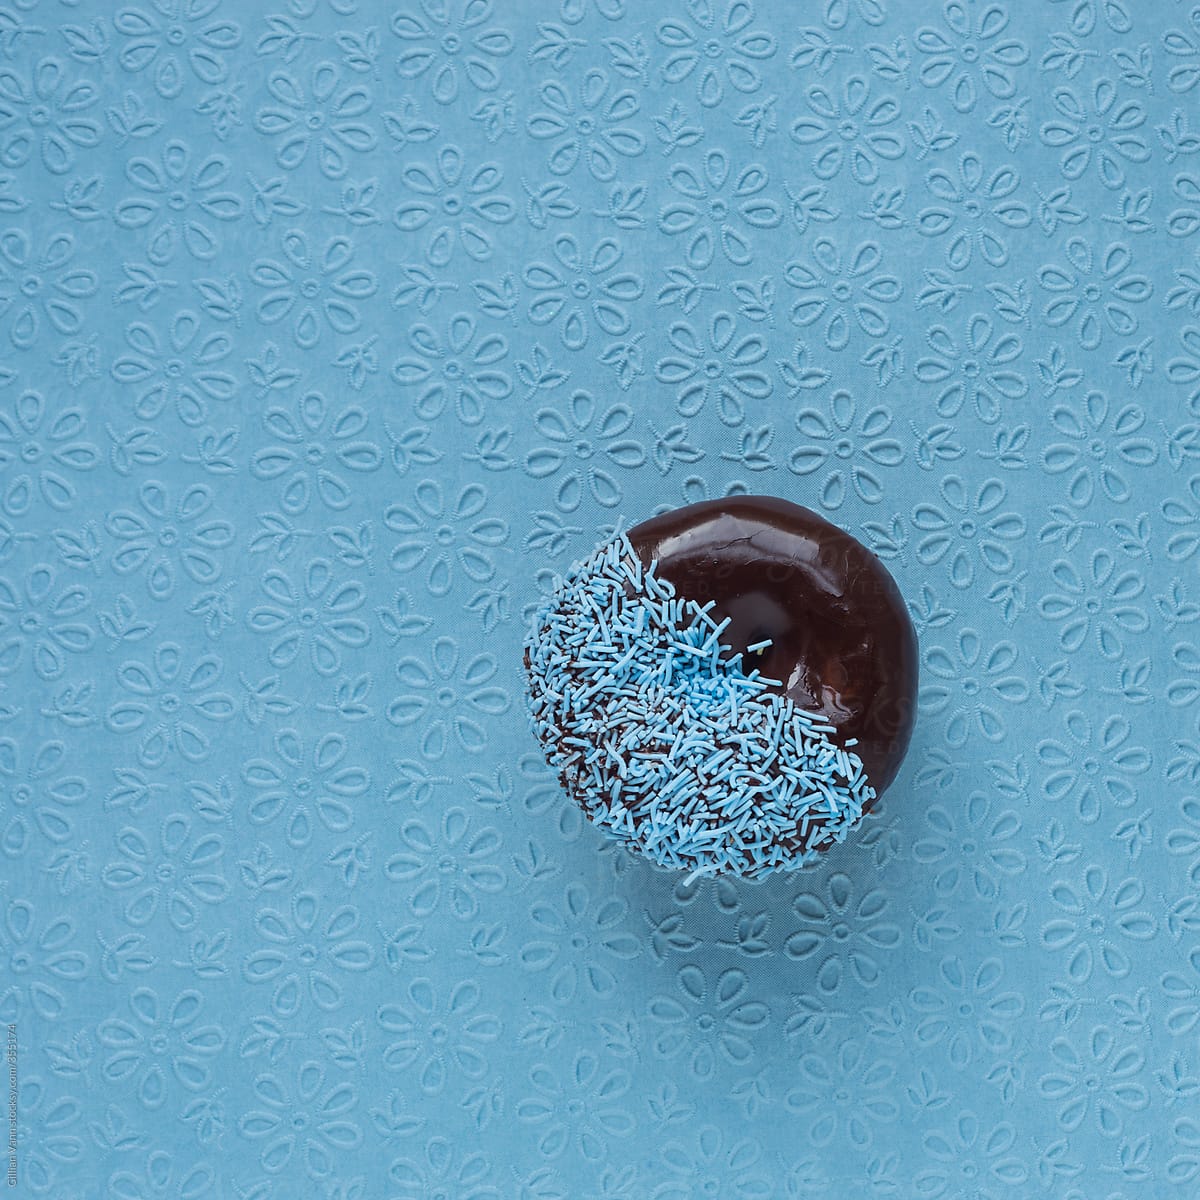 donut with chocolate icing and blue sprinkles on textured blue background